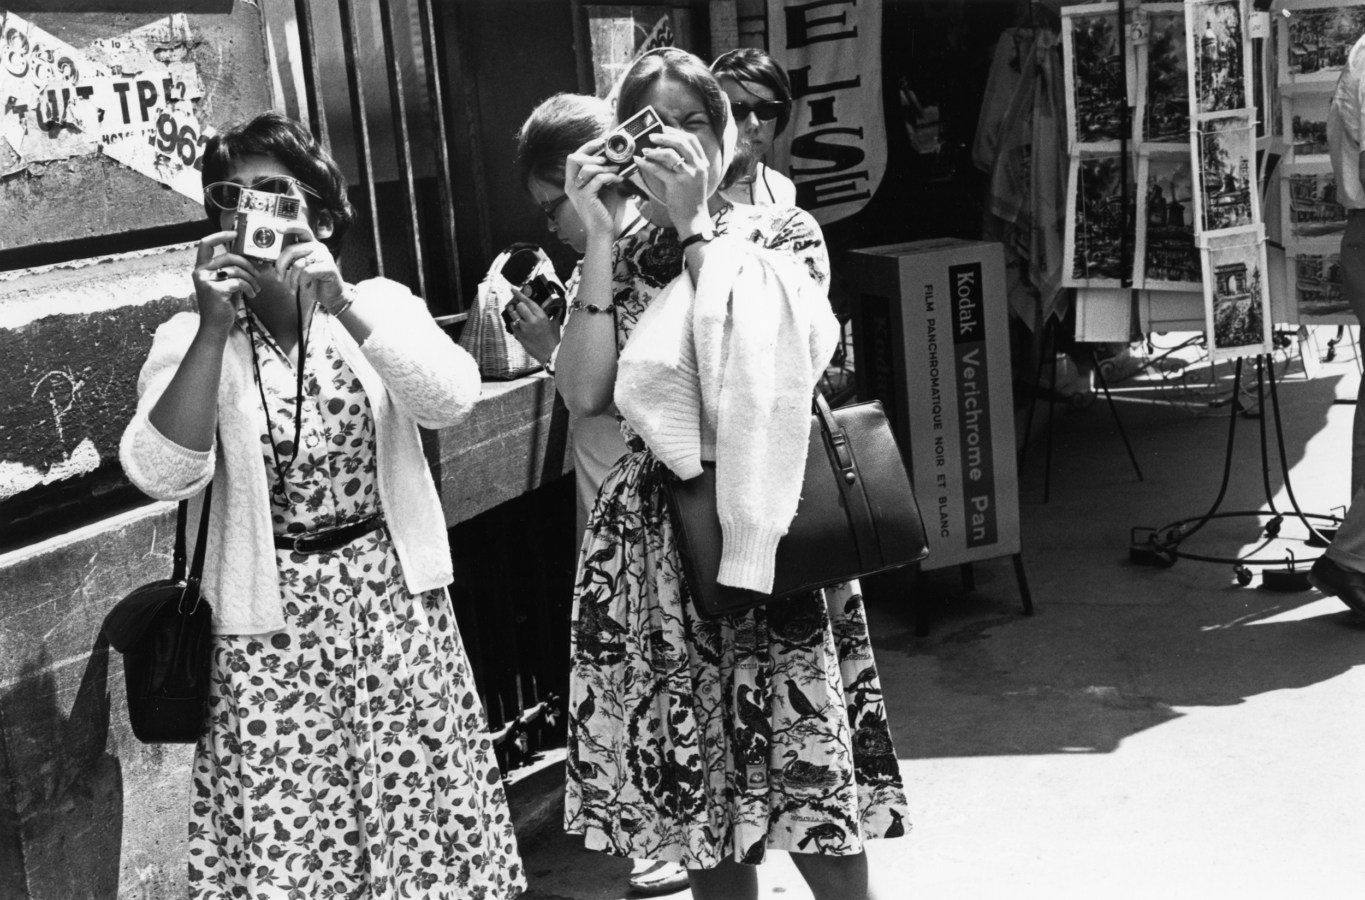 Black and white photograph of two women taking photographs on a city sidewalk